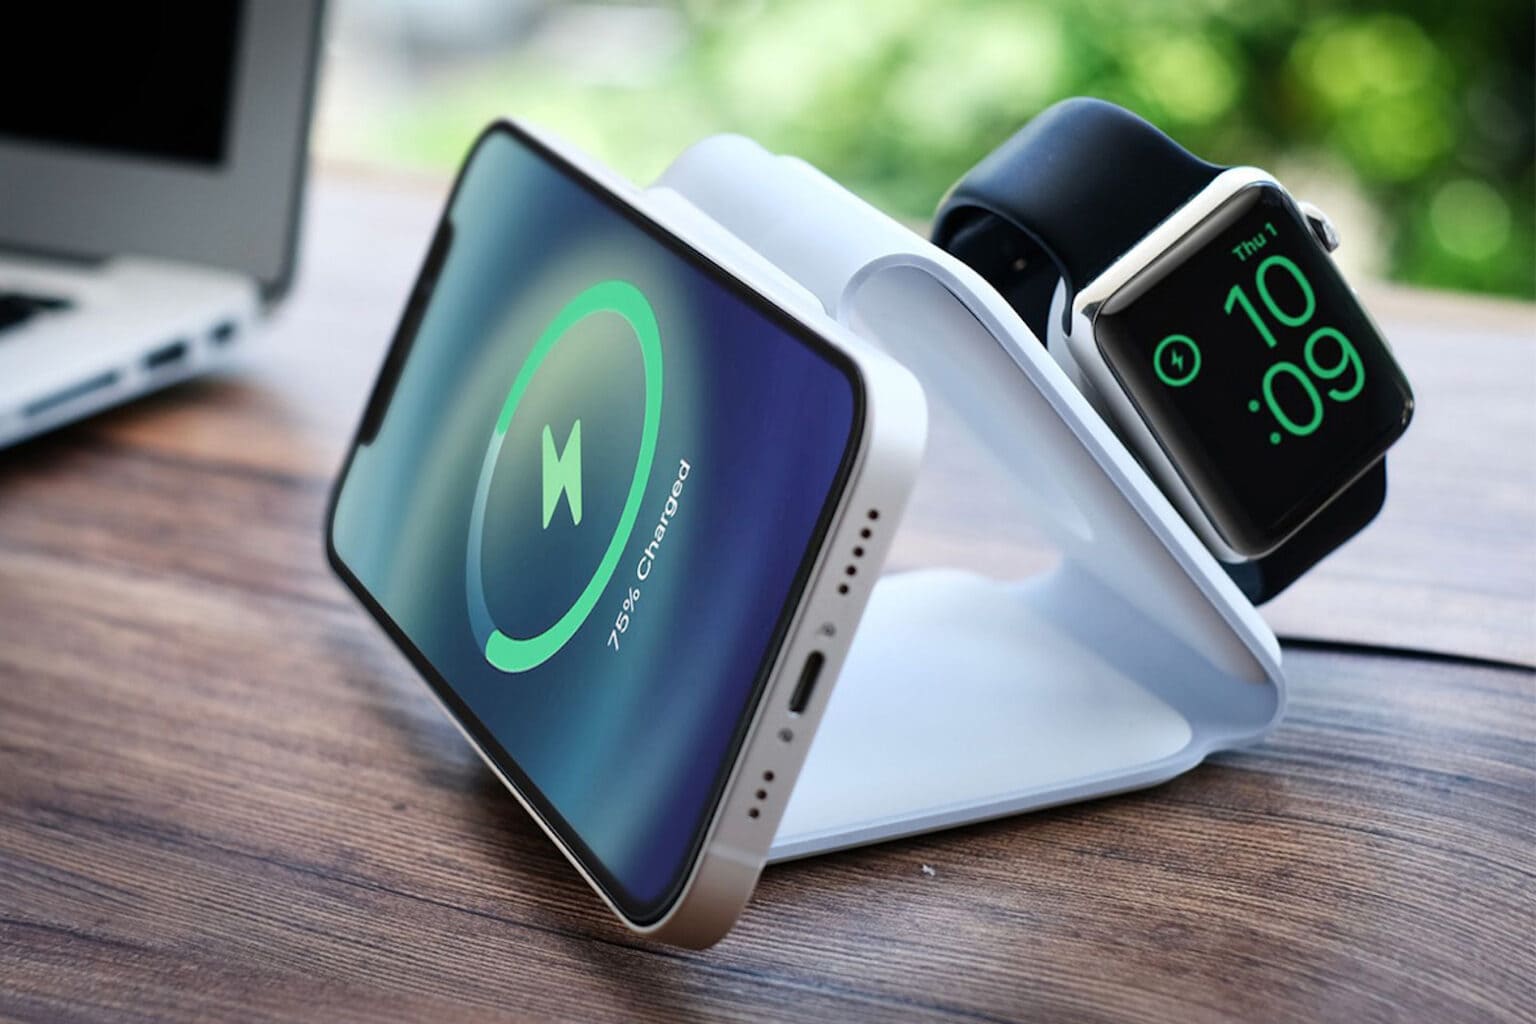 Get 35% off this 3-in-1 wireless charger loved by users.